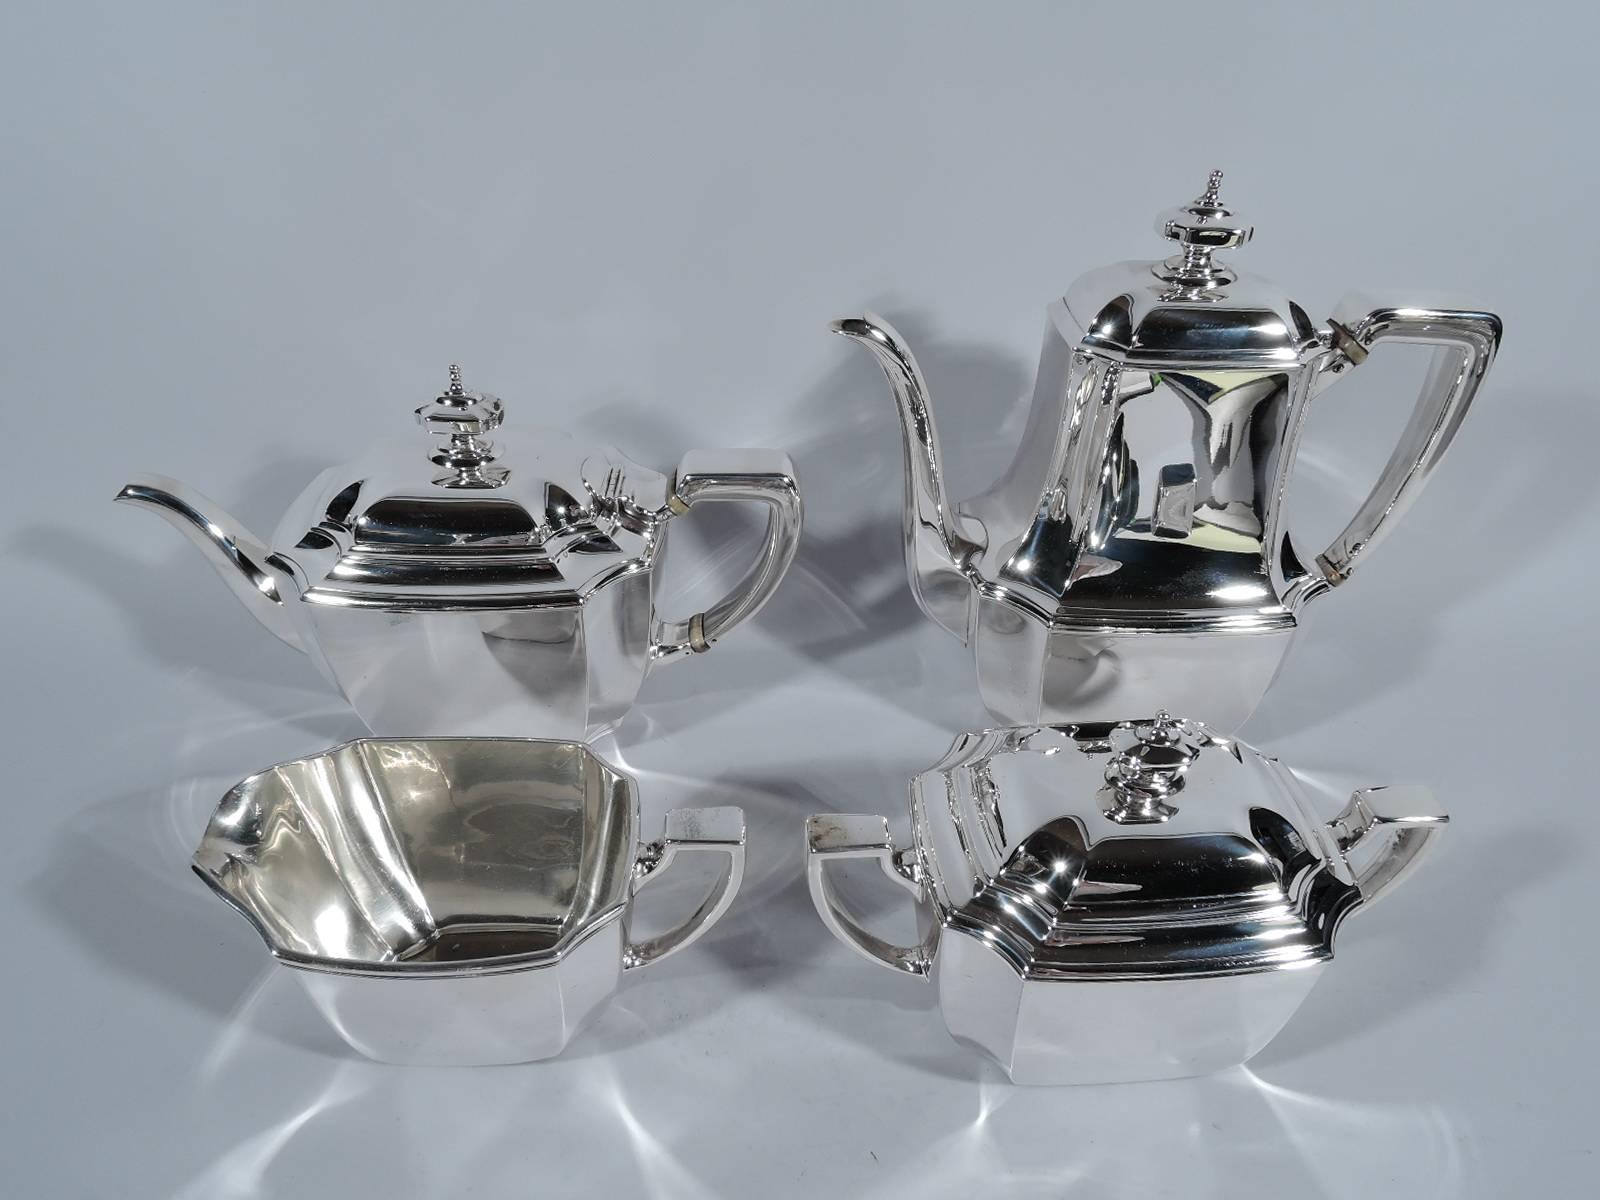 Sterling silver four-piece coffee and tea set in Hampton pattern. Made by Tiffany & Co. in New York, circa 1912. This set comprises coffeepot, teapot, creamer, and sugar.

Rectilinear with curved sides, concave corners, and stepped rim. Covers